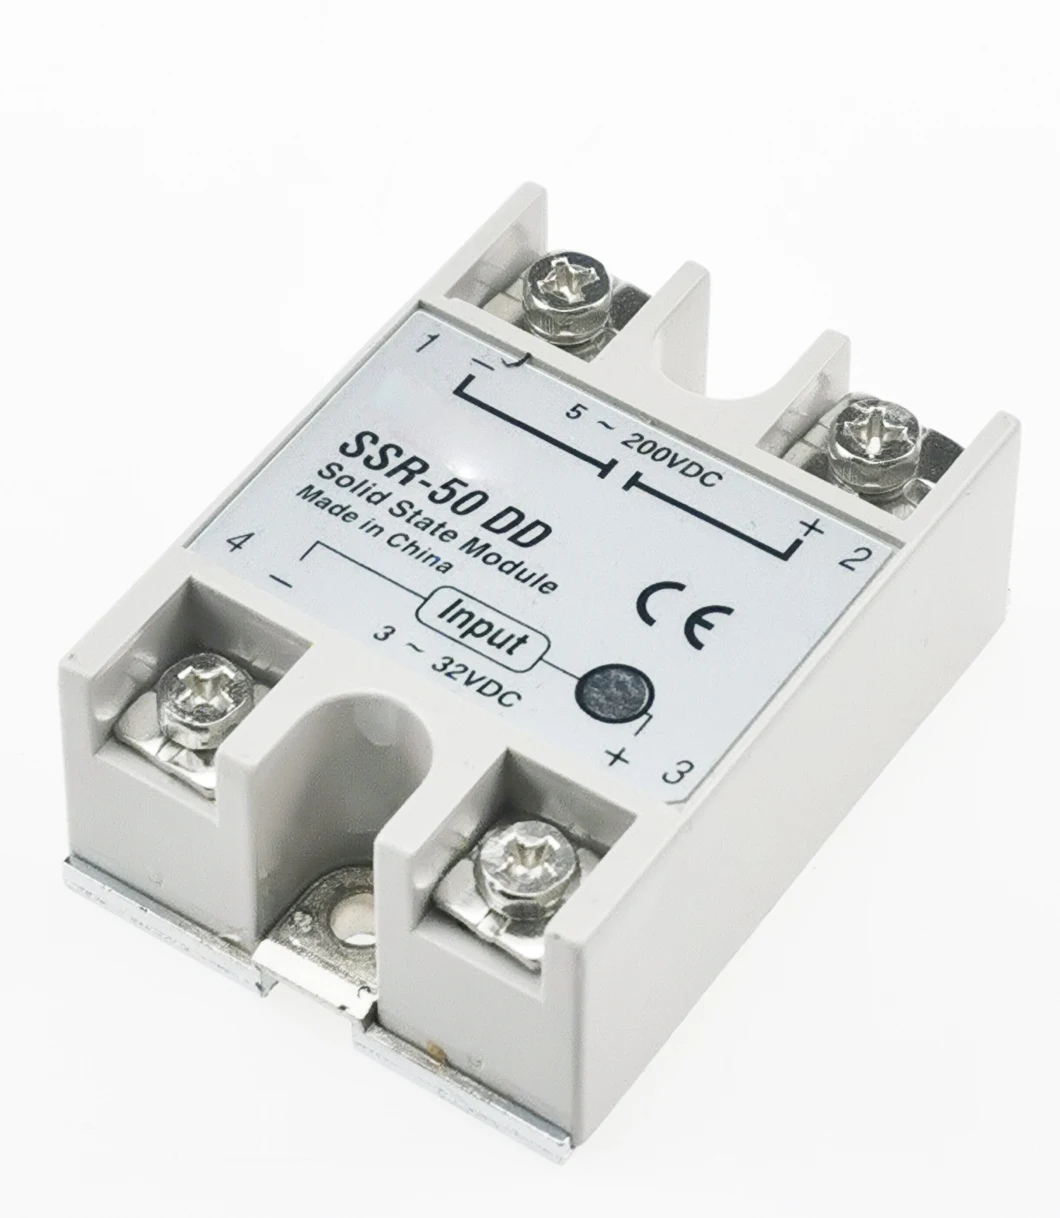 SSR-100dd Solid State Relay, CE Proved Solid State Relay, 24-380VAC Single Solid State Relay, ISO9001 Passed Solid State Relay